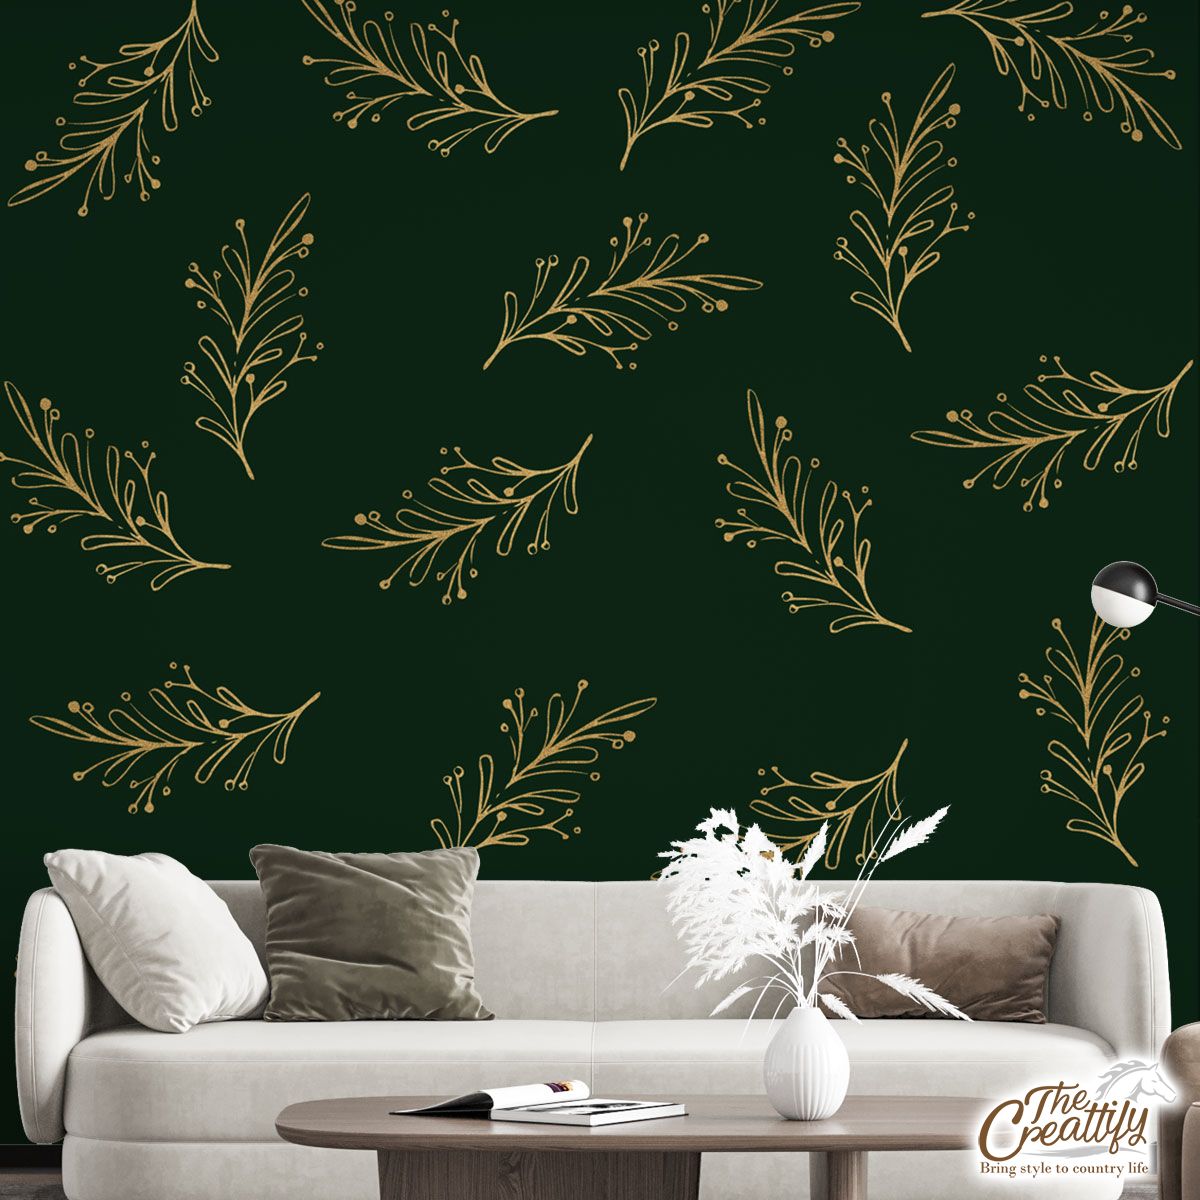 Gold And Green Christmas Tree Branch Wall Mural